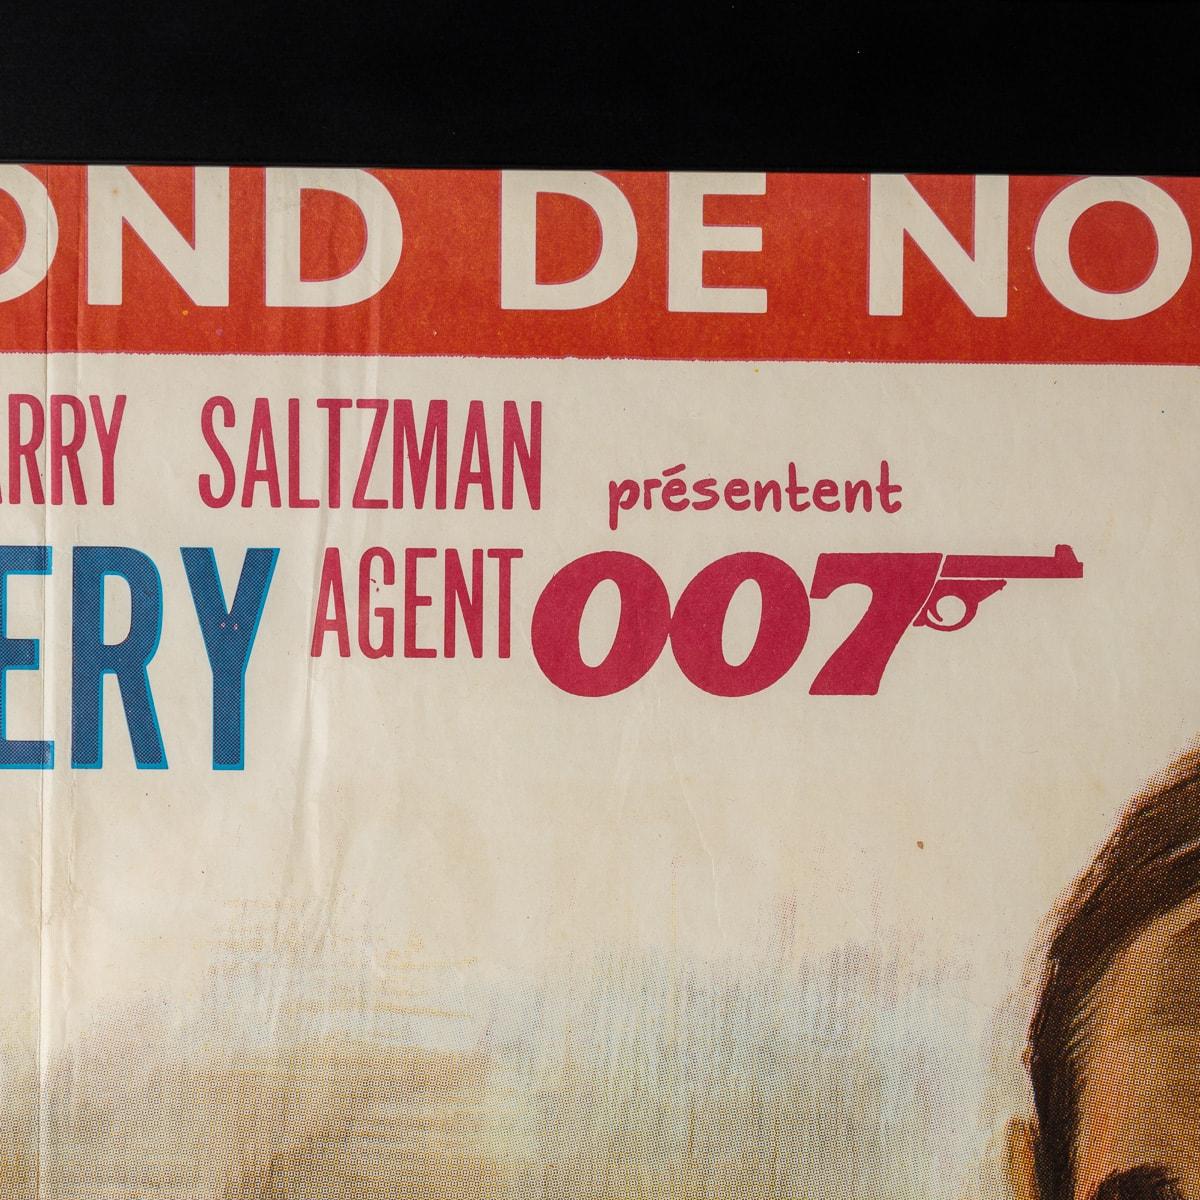 Original French Release James Bond Goldfinger Poster c.1964 In Good Condition For Sale In Royal Tunbridge Wells, Kent